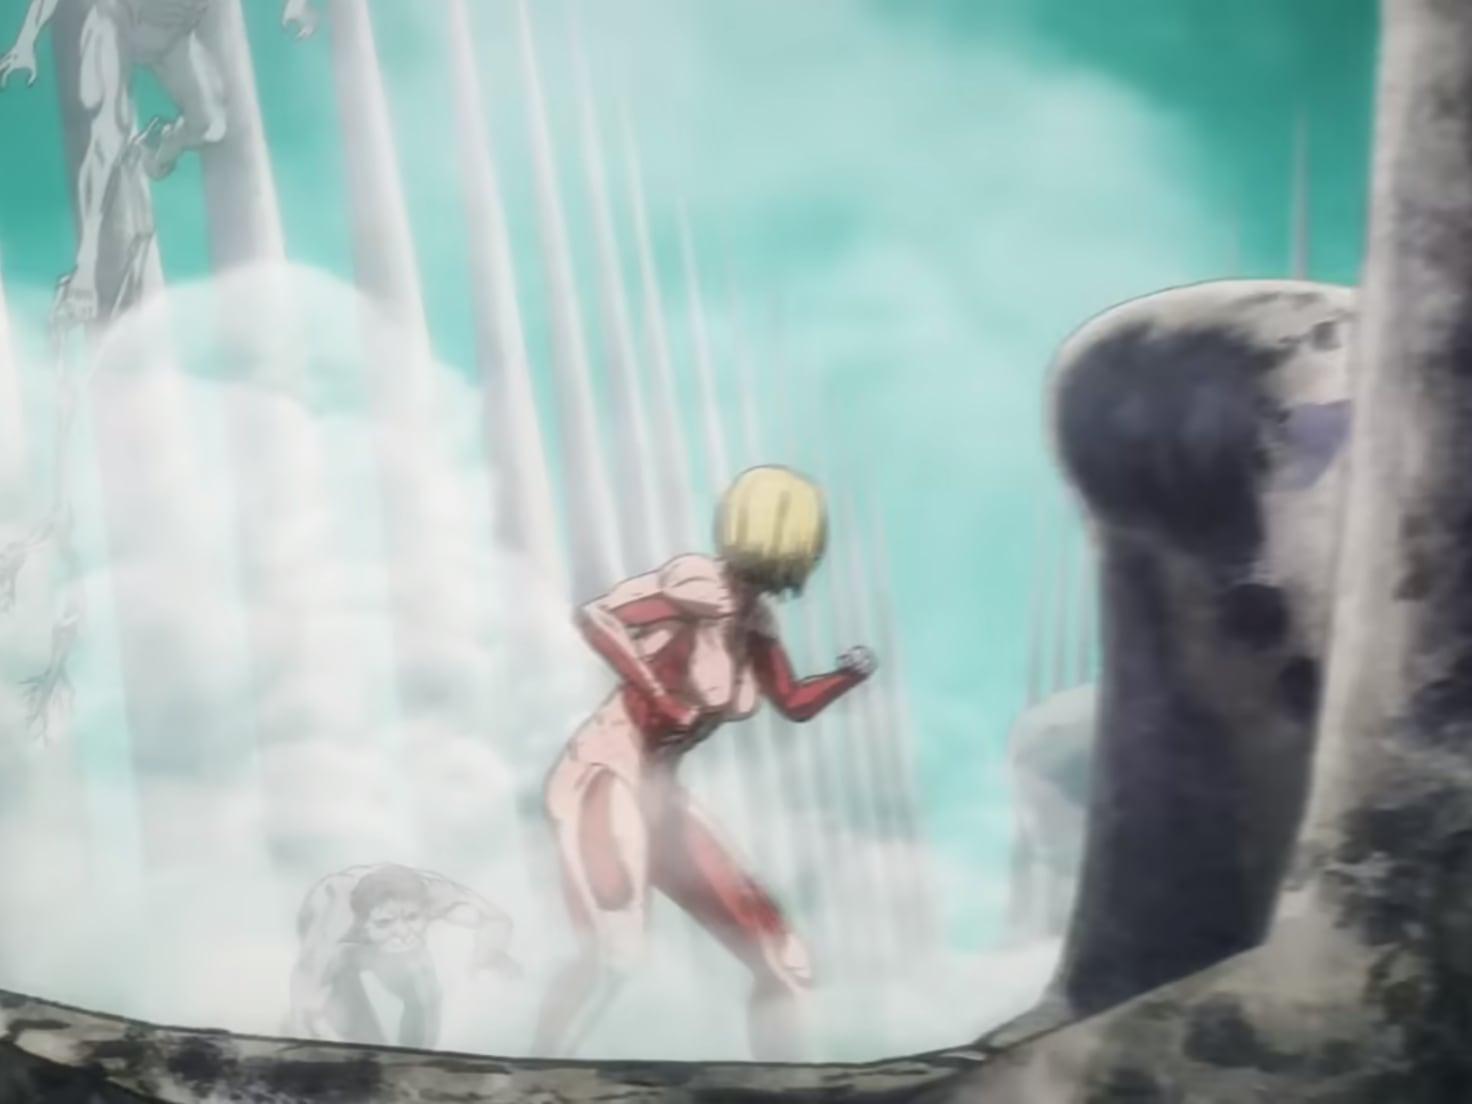 Attack On Titan Anime Finale Rewrites The Ending For The Better